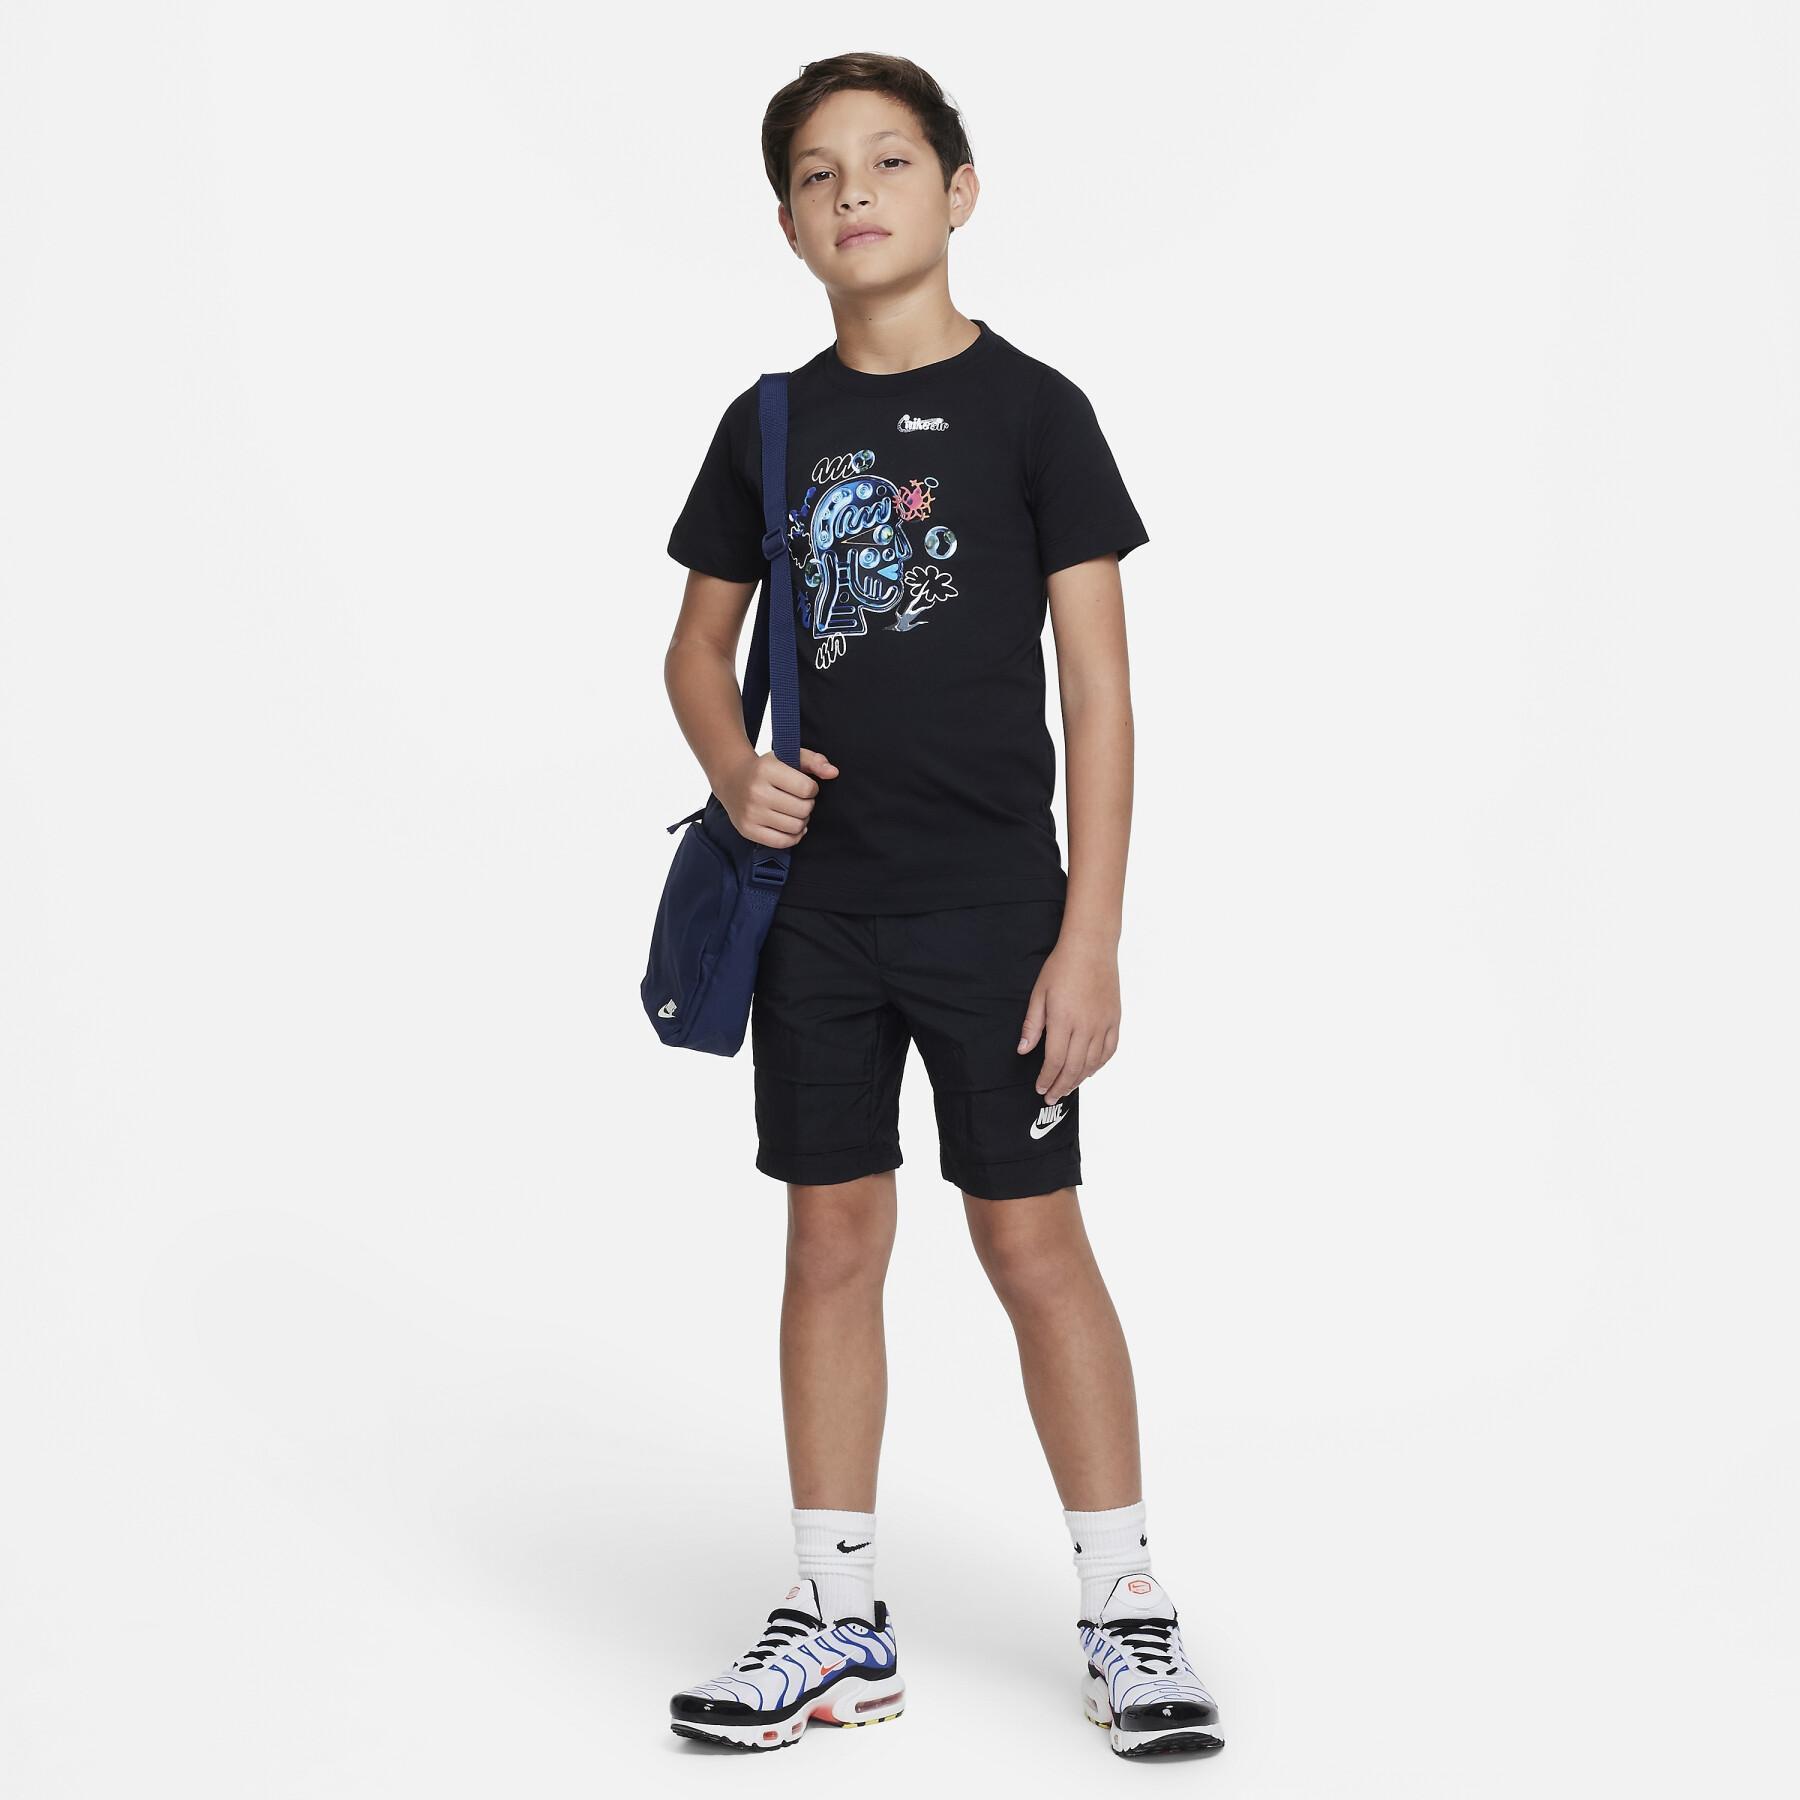 Child's T-shirt Nike Air Max Day